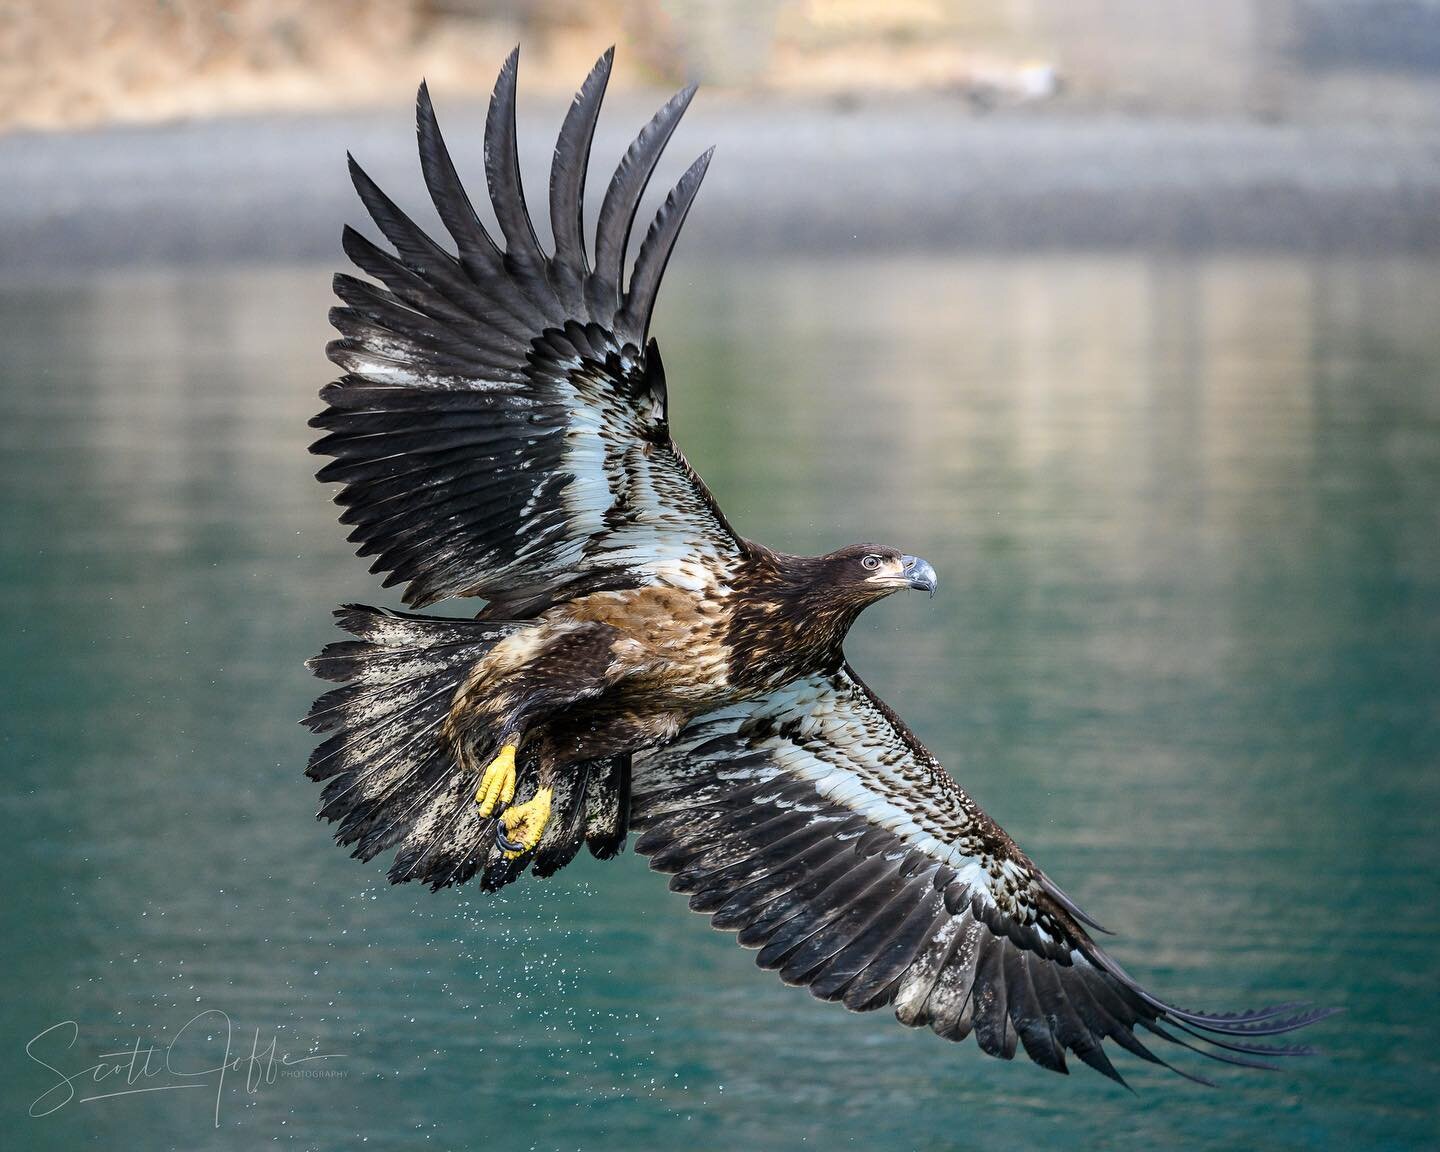 Here it&rsquo;s a juvenile Bald Eagle I photographed last March in Homer, Alaska. It was an amazing experience to watch the eagles, especially the juveniles!Thanks for viewing 😉 March 16, 2022
#baldeagle&nbsp;
#baldeaglesofinstagram&nbsp;
#baldeagle